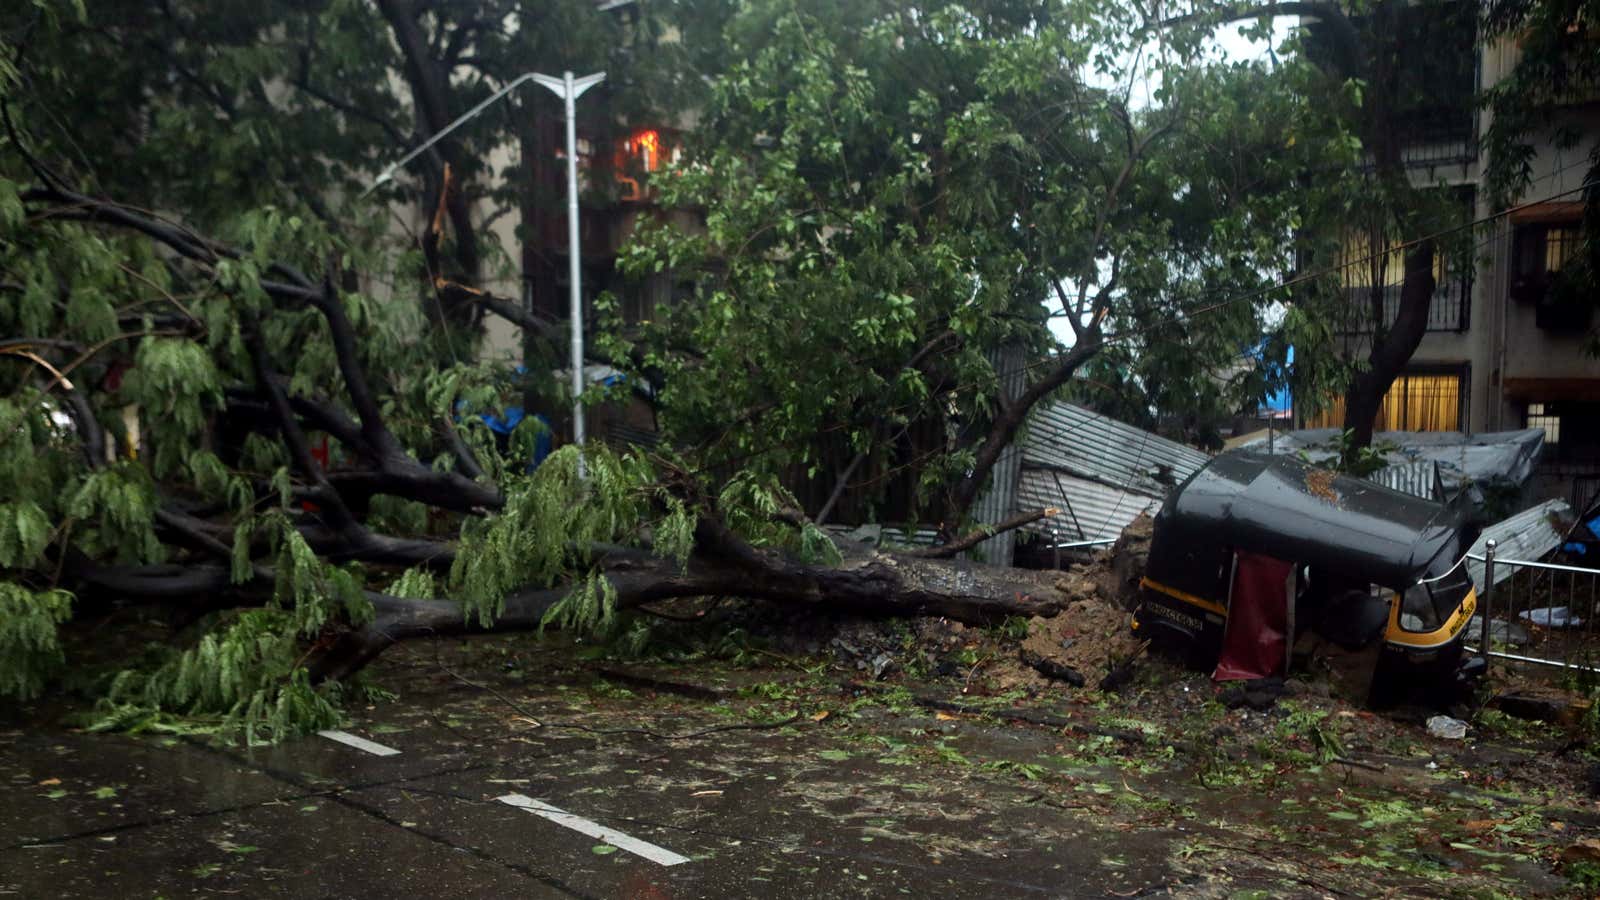 An uprooted tree is seen on a road after strong winds caused by Cyclone Tauktae in Mumbai, India May 17, 2021.